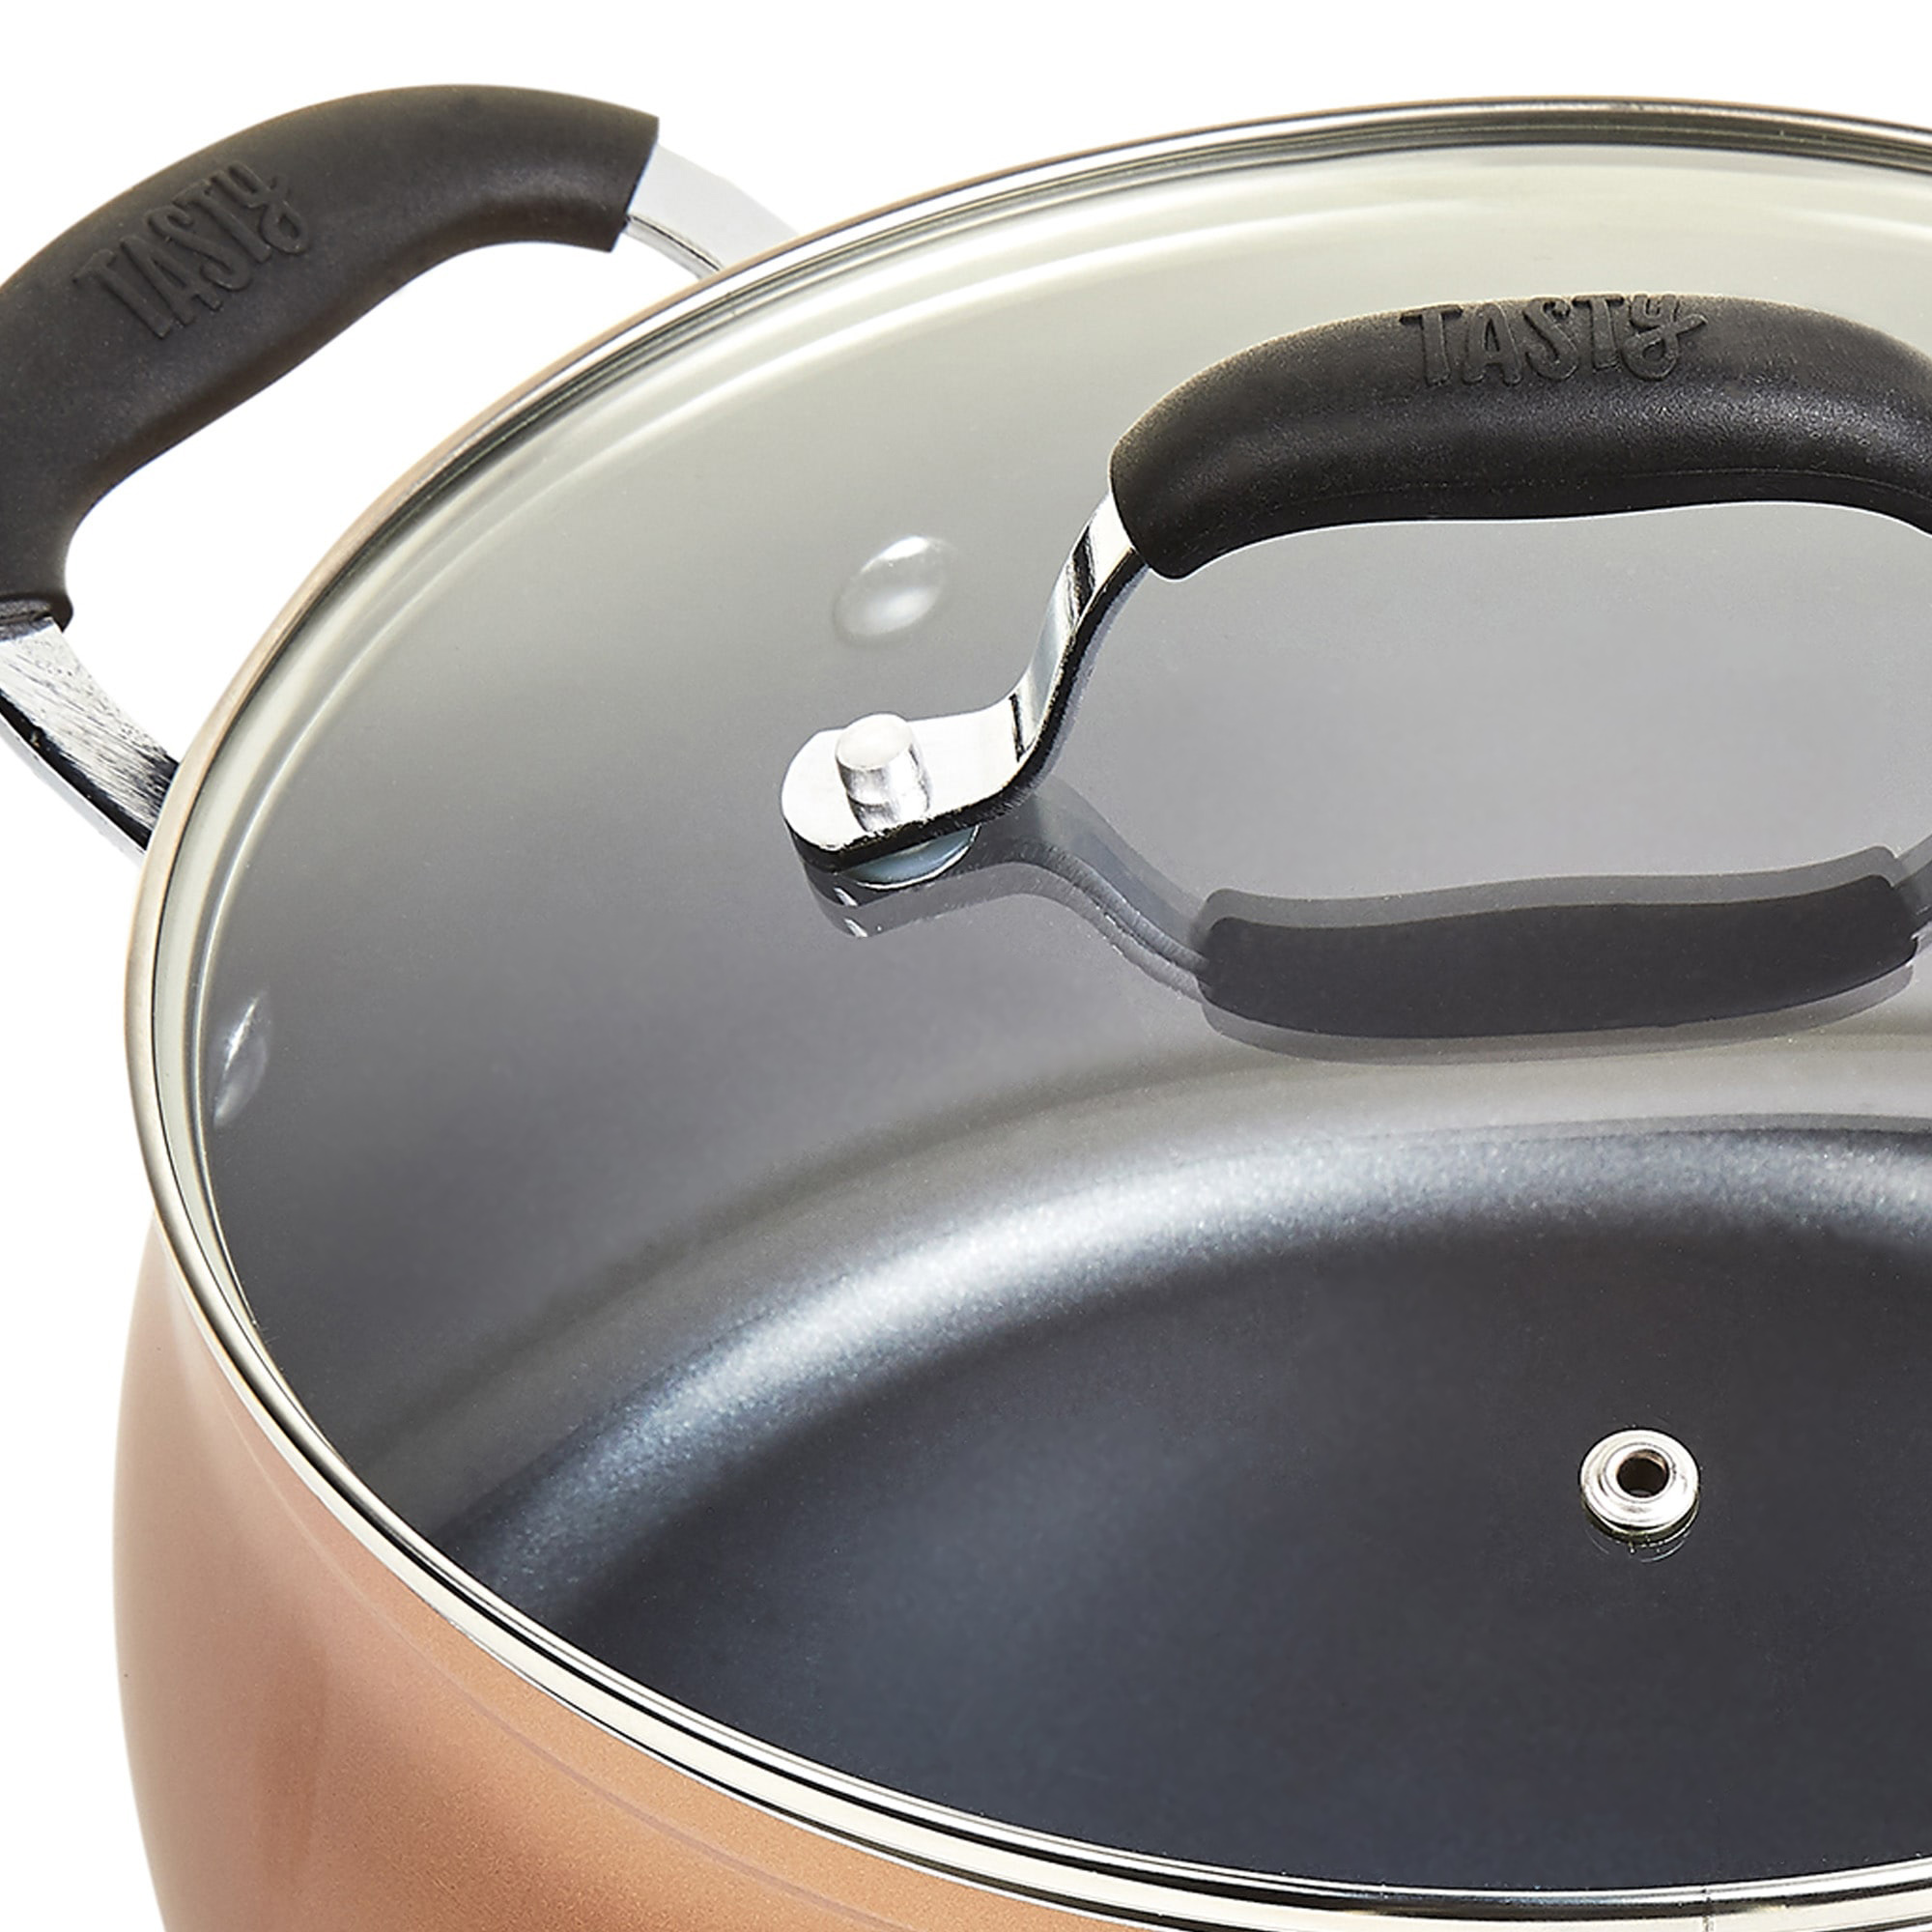 Tasty 5 Quart Non-Stick Dutch Oven with Lid - image 4 of 12